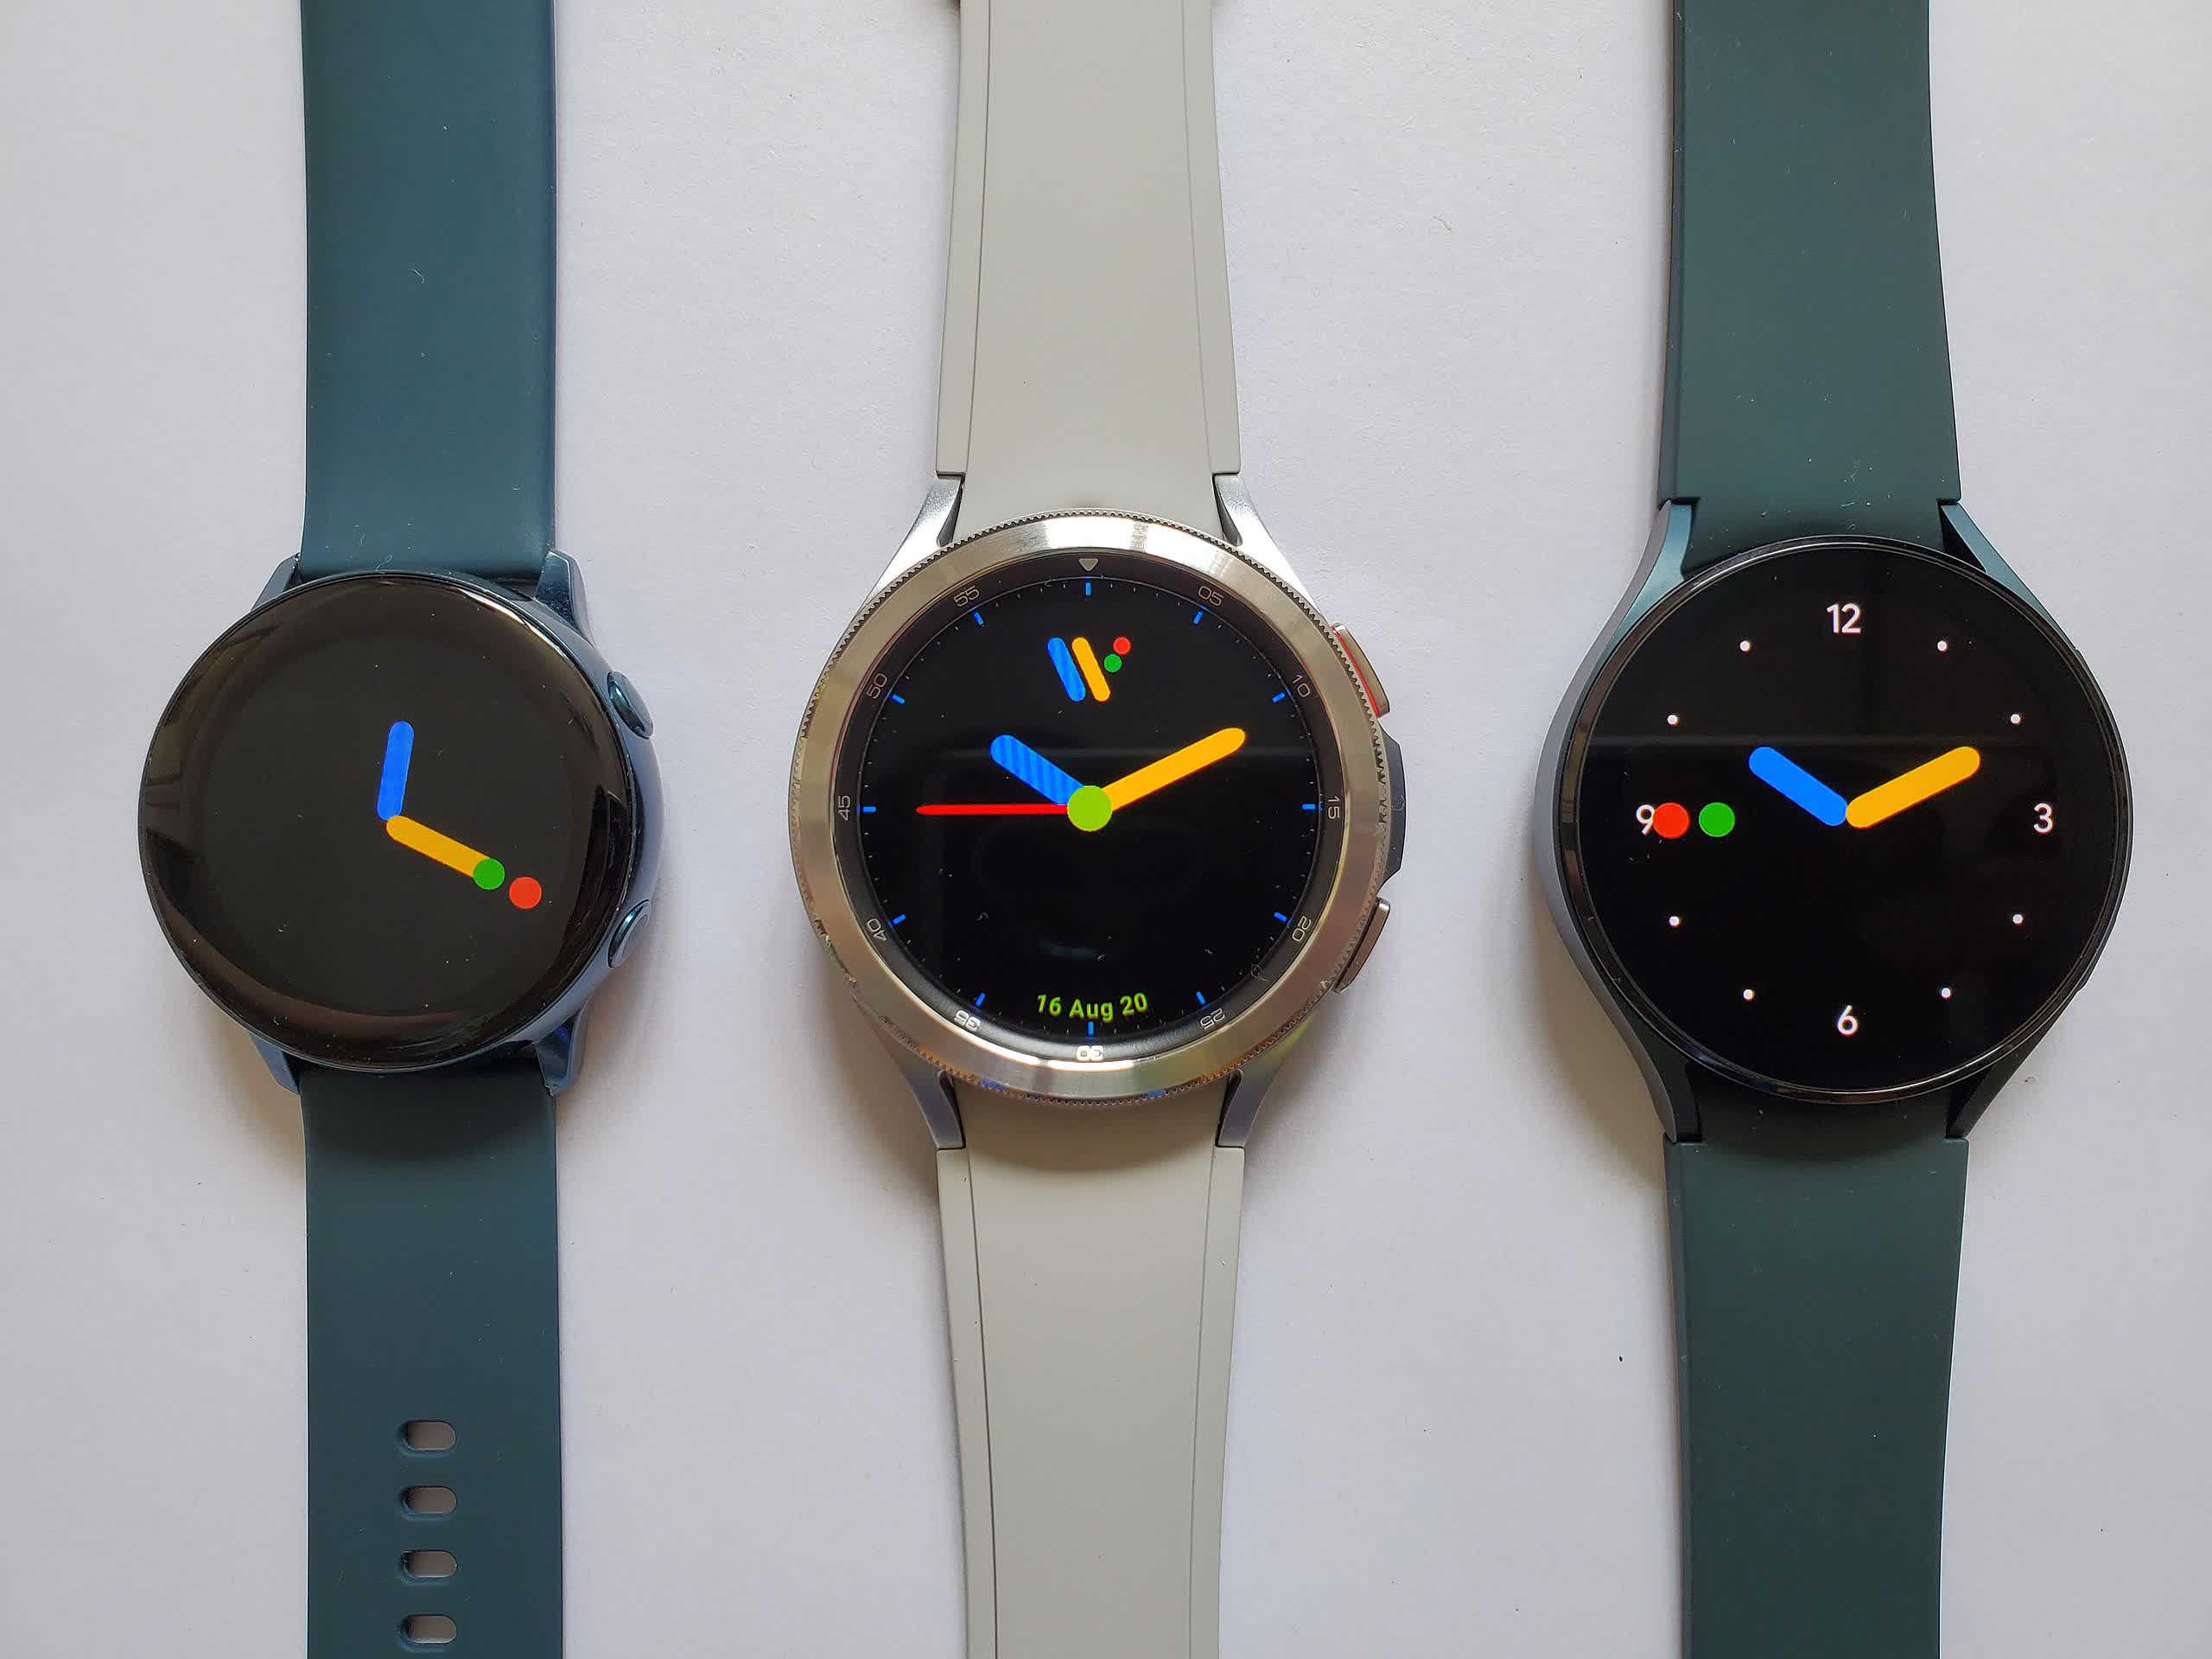 Google and Samsung are working on the next generation of Wear OS-based wearable tech